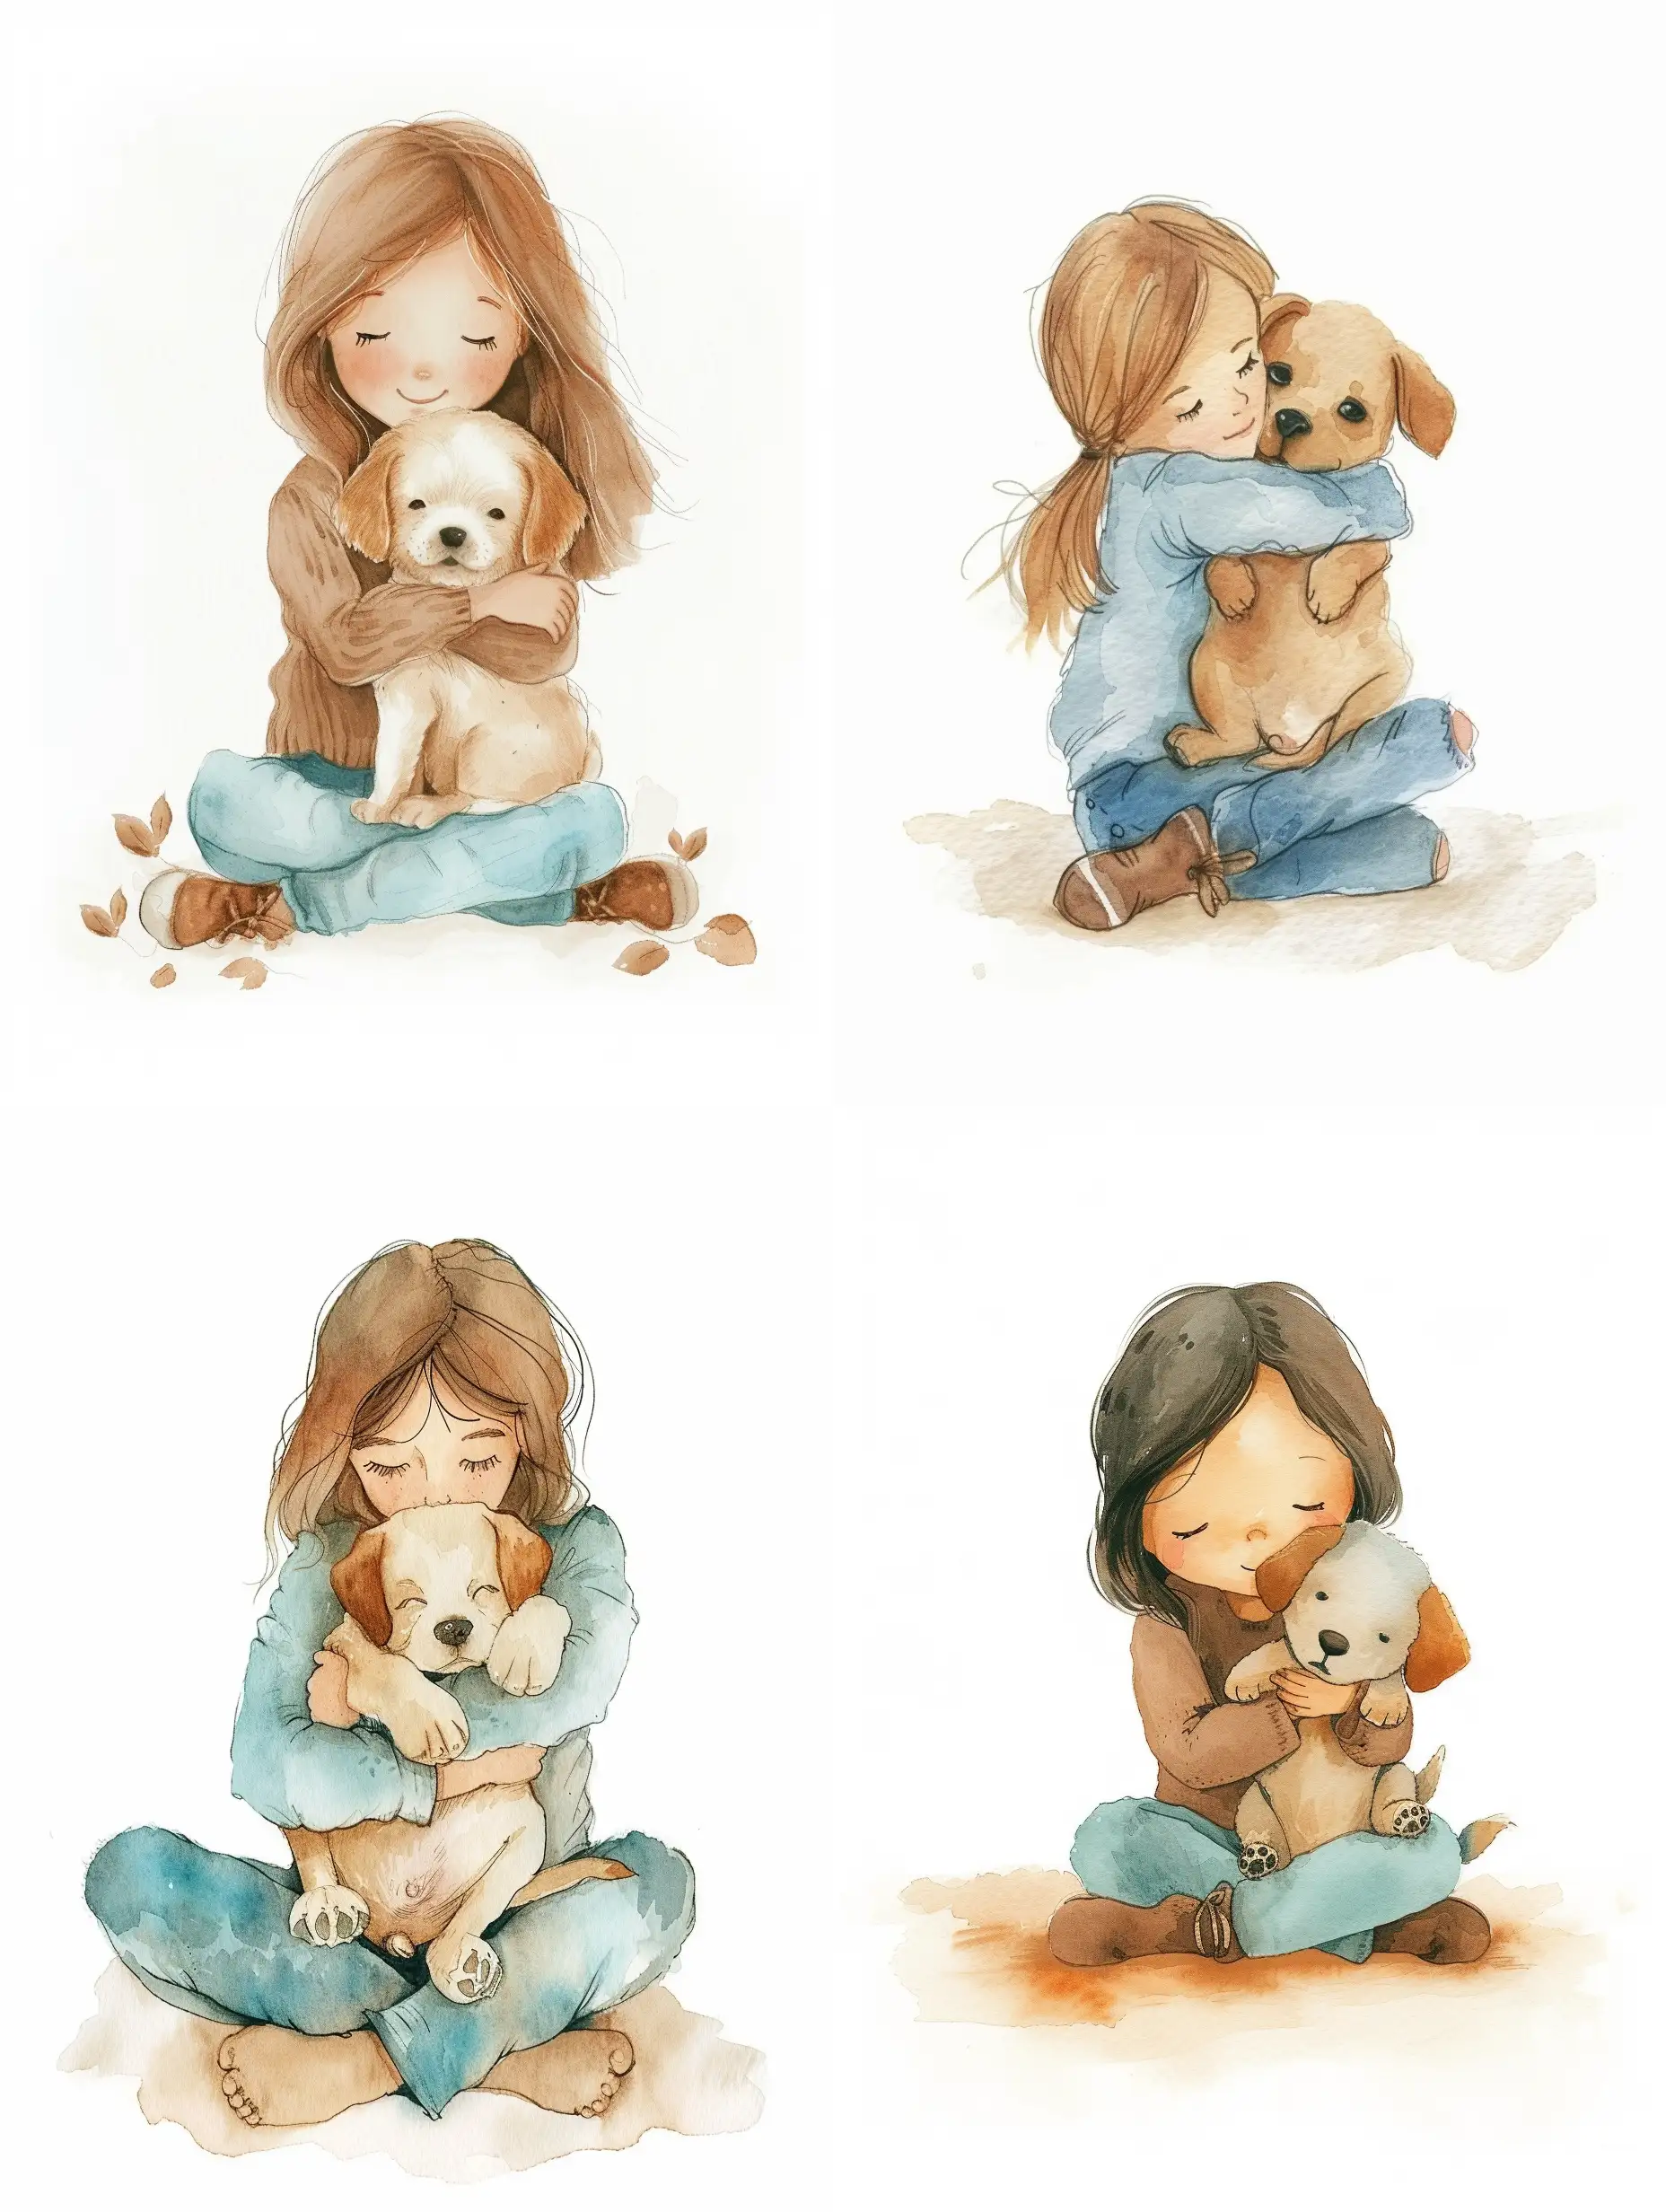 watercolor illustration, stylized characters on a white background, warm colors brown and soft blue, girl sitting and holding a cute puppy in her arms, full length, hugs, tenderness